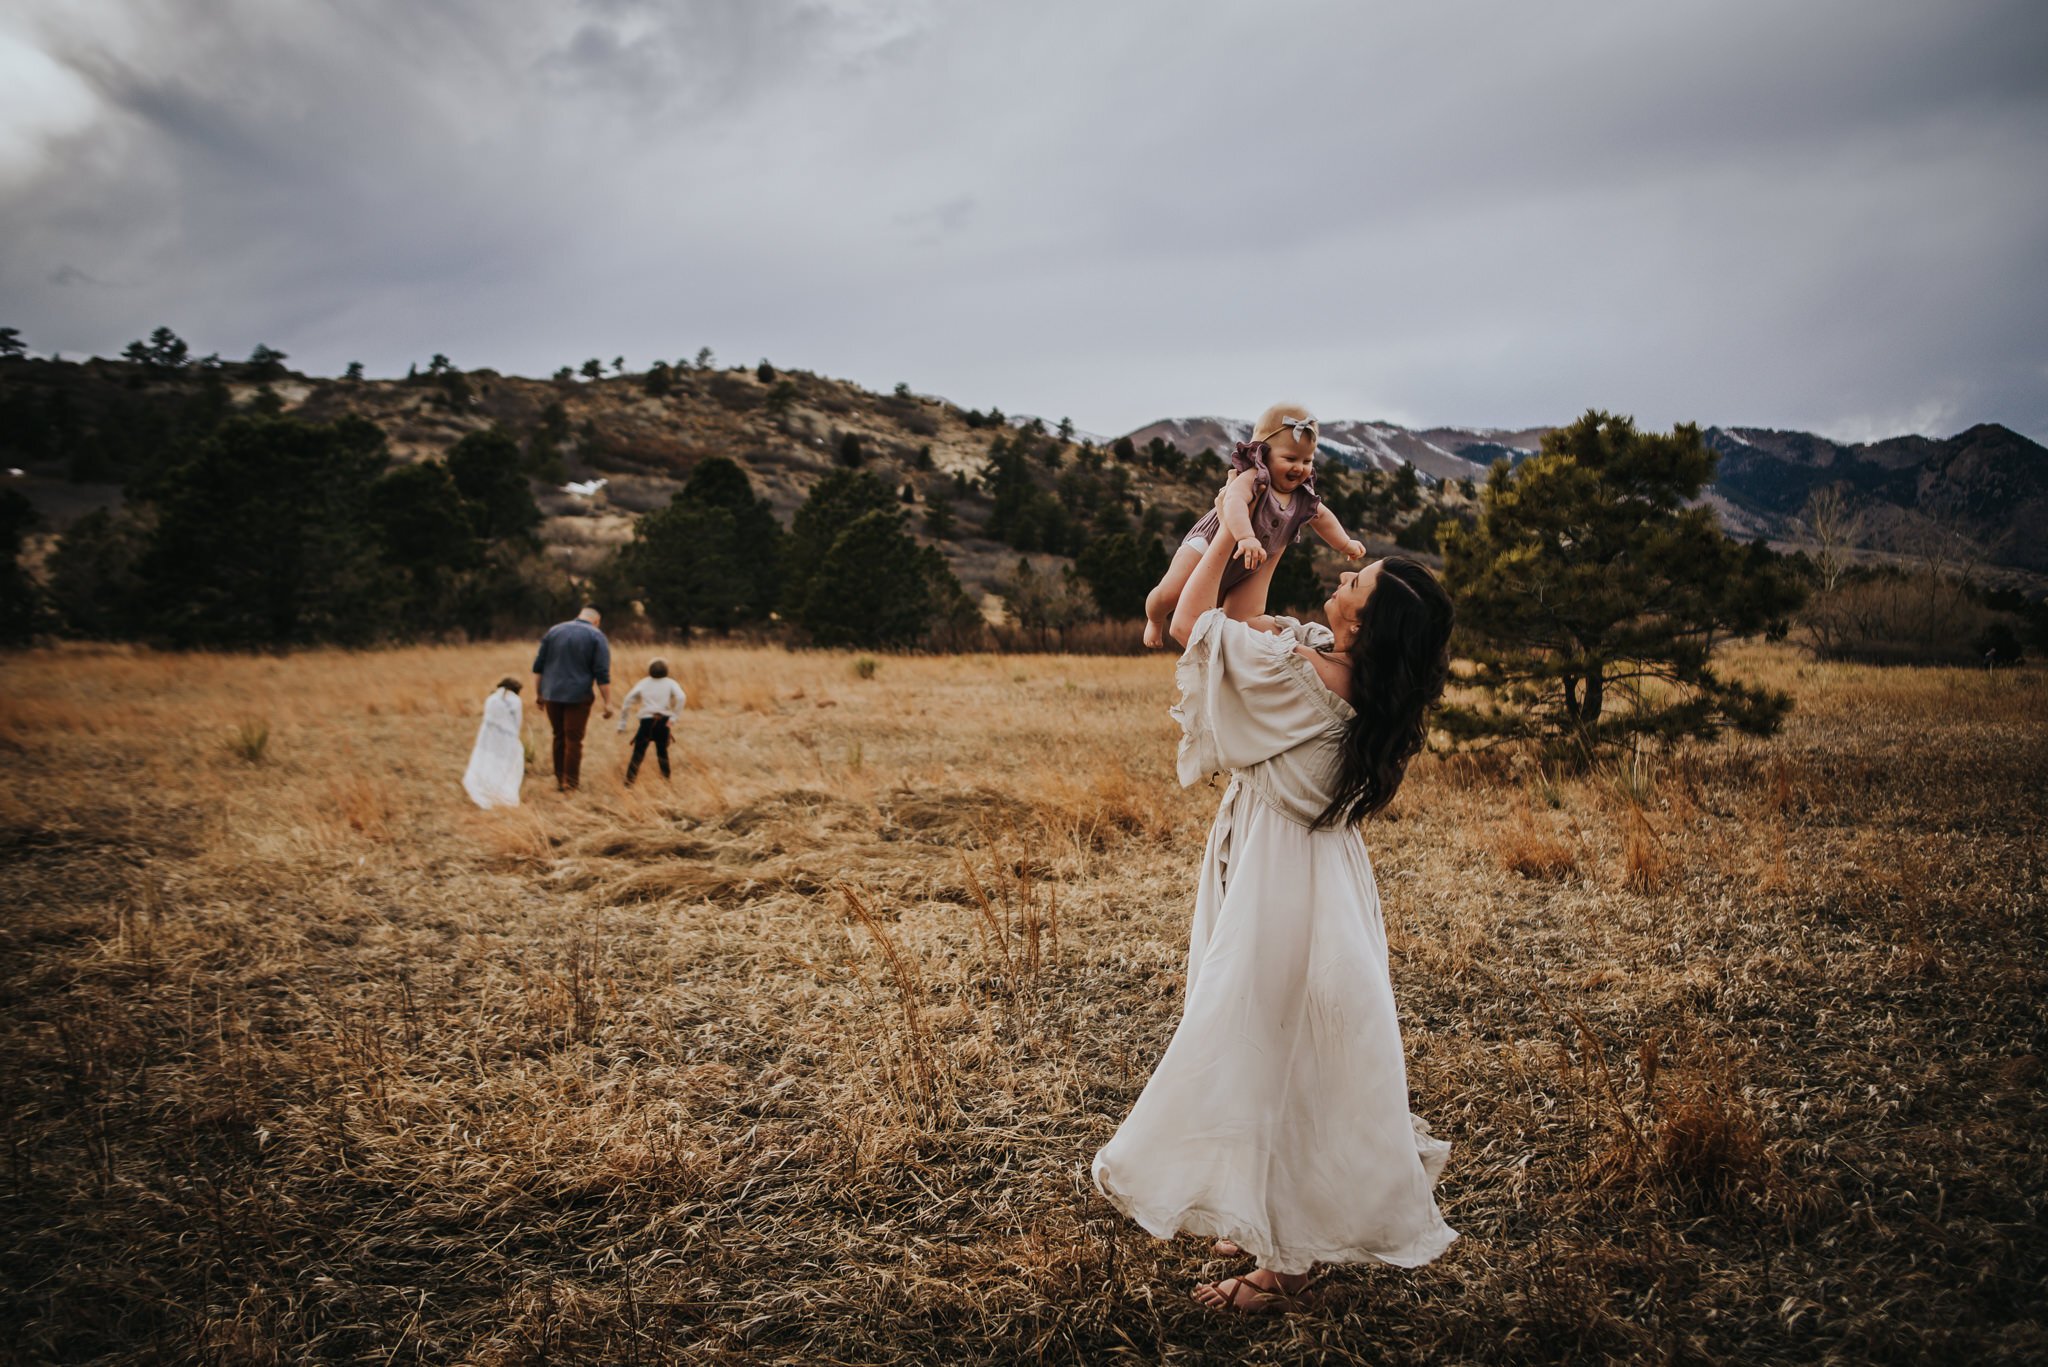 Miller+Family+Session+Mentorship+Colorado+Springs+Colorado+Sunset+Ute+Valley+Park+Mountains+Fields+Mom+Dad+Son+Daughter+Baby+Wild+Prairie+Photography-09-2020.jpeg